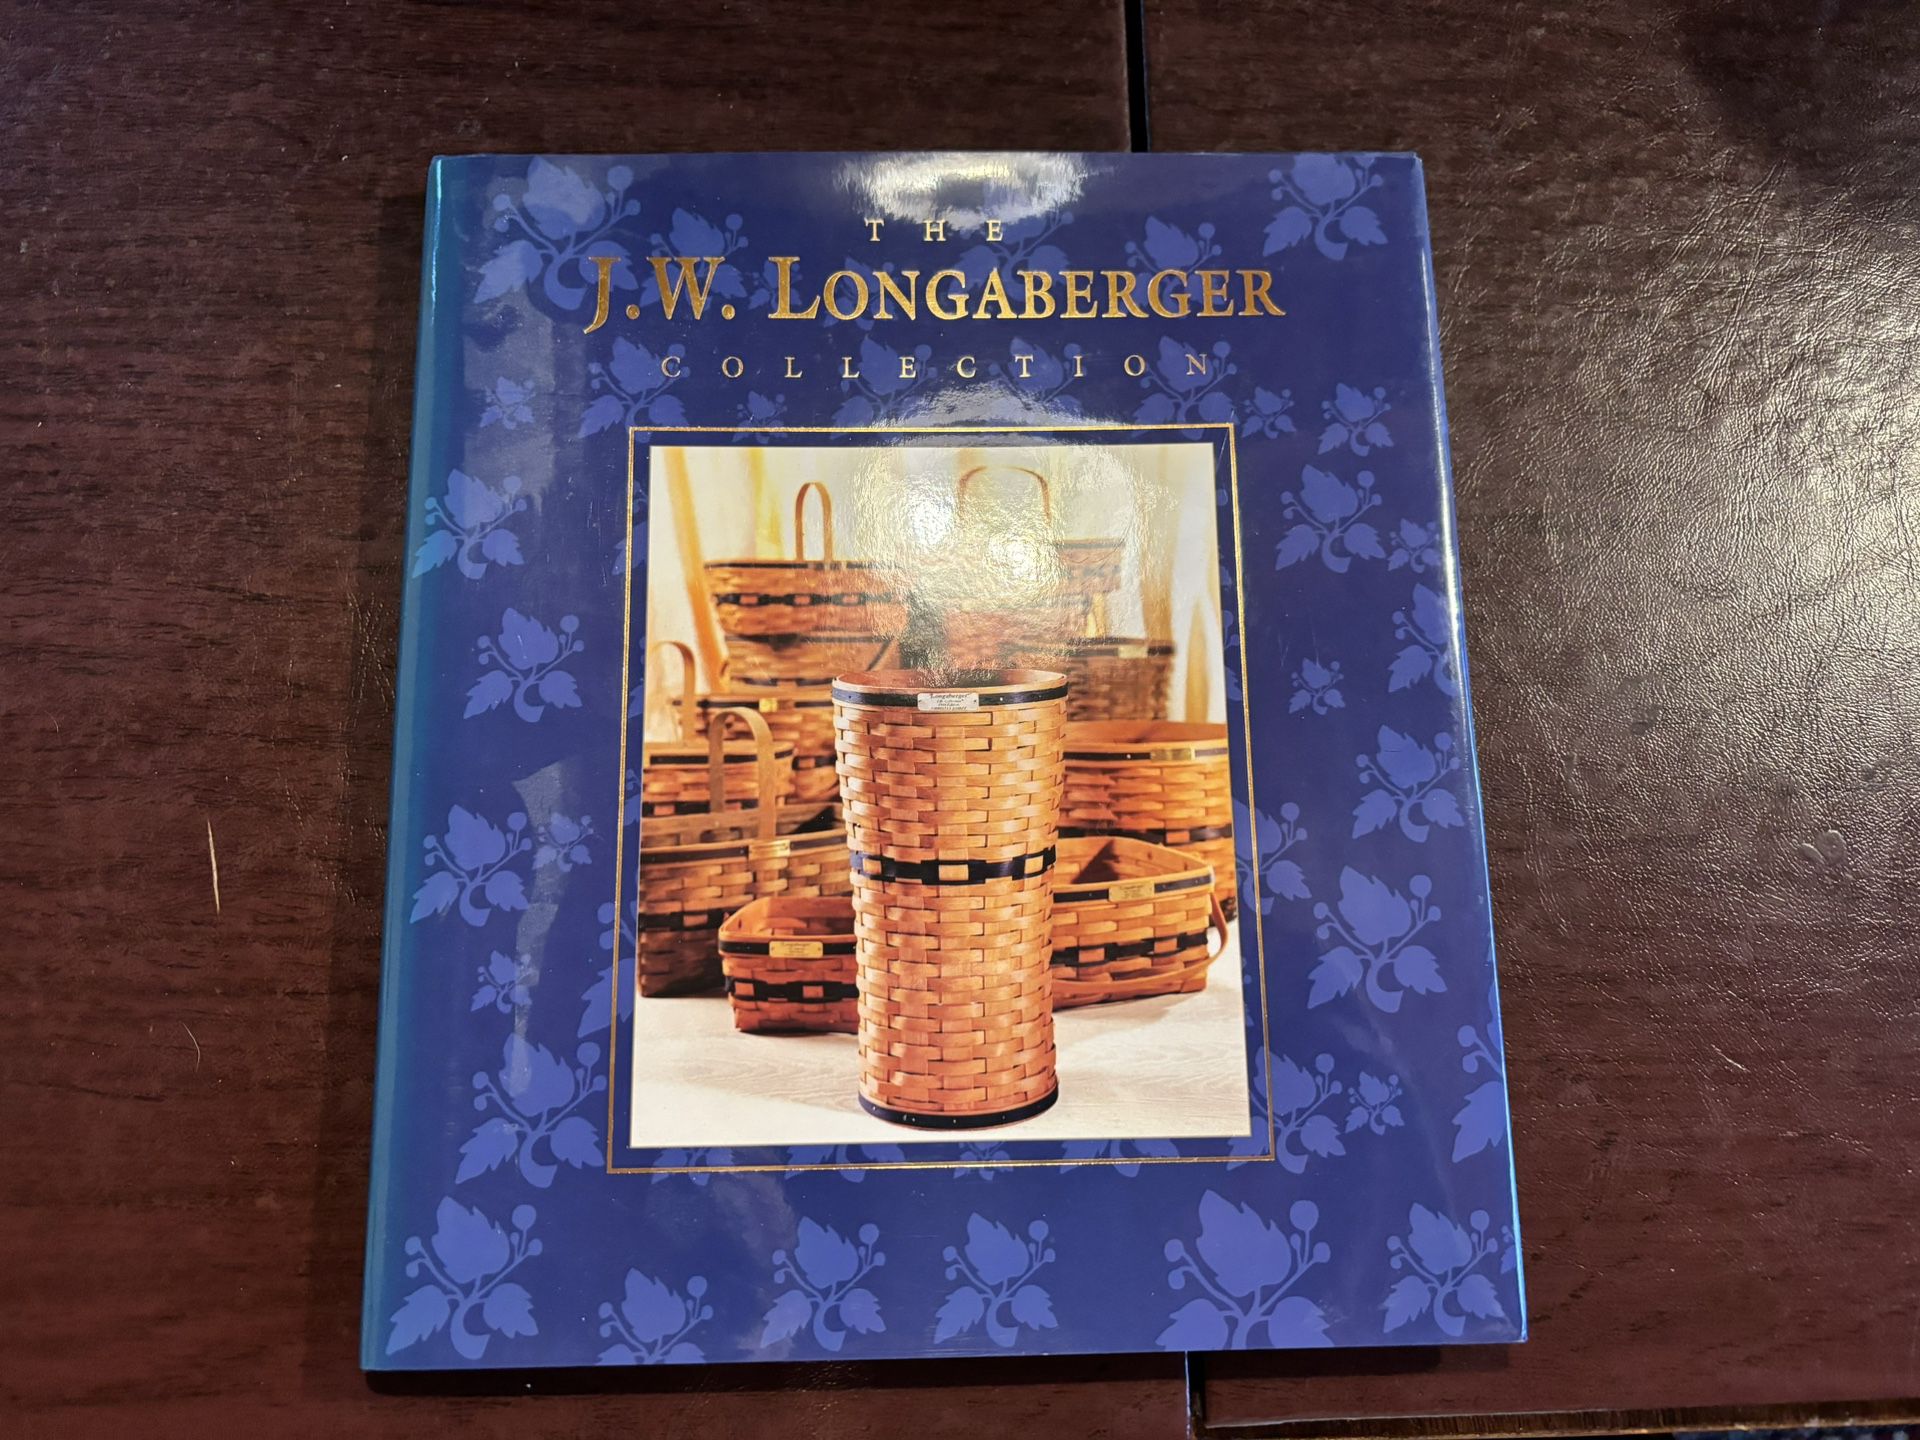 JW Collection Longaberger NWOT Vintage Collectible Book